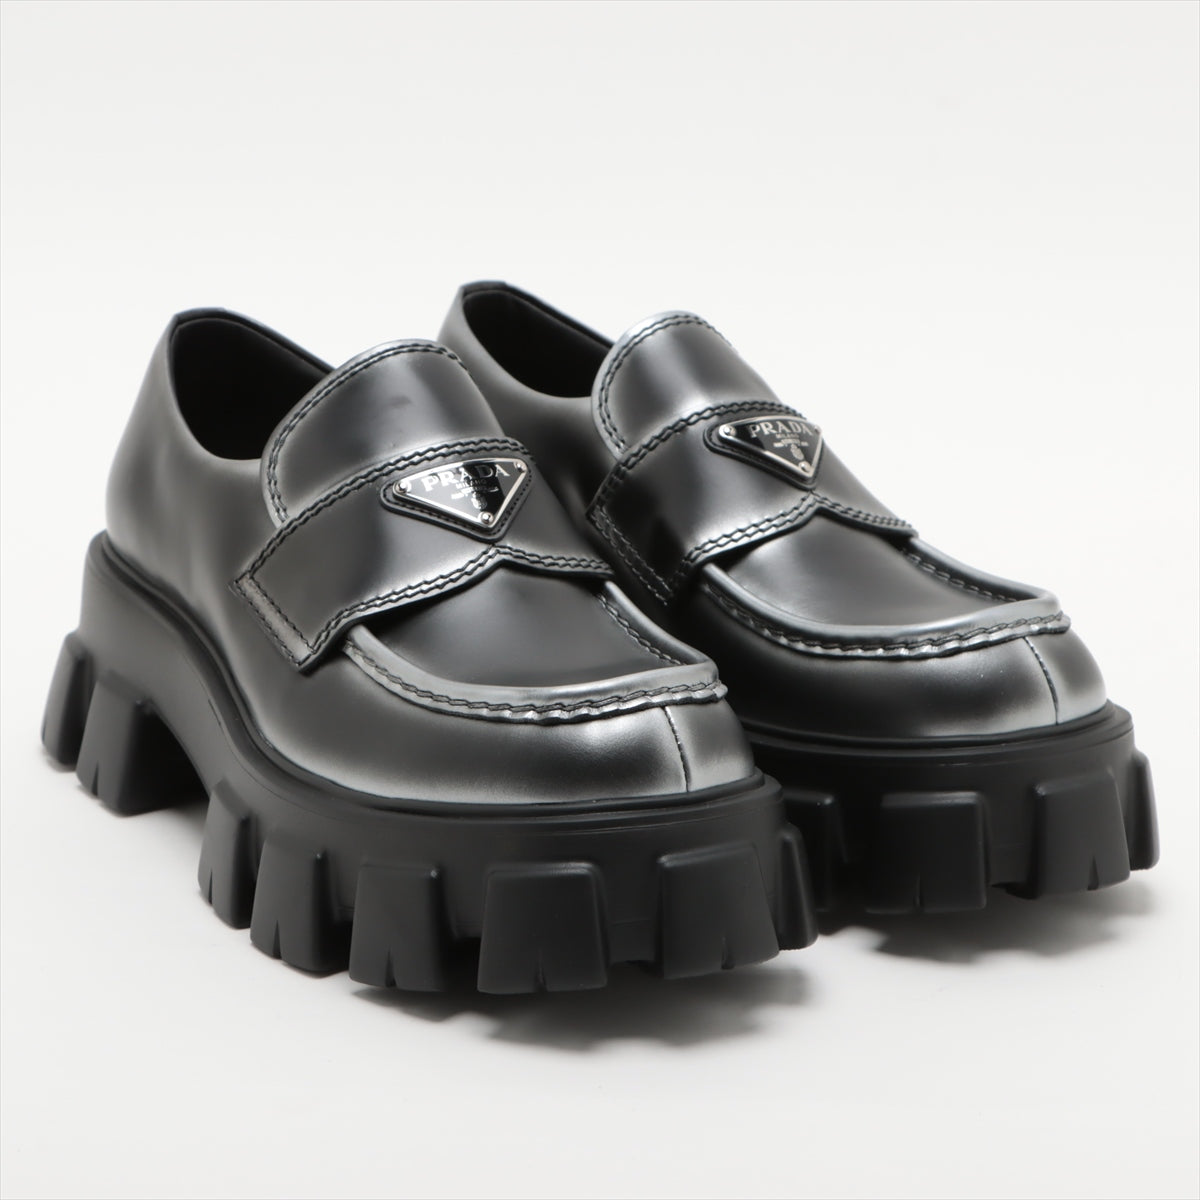 Prada Monolith brushed leather Loafer 5.5 Men's Black × Silver 2DE129 Gradation Box There is a storage bag